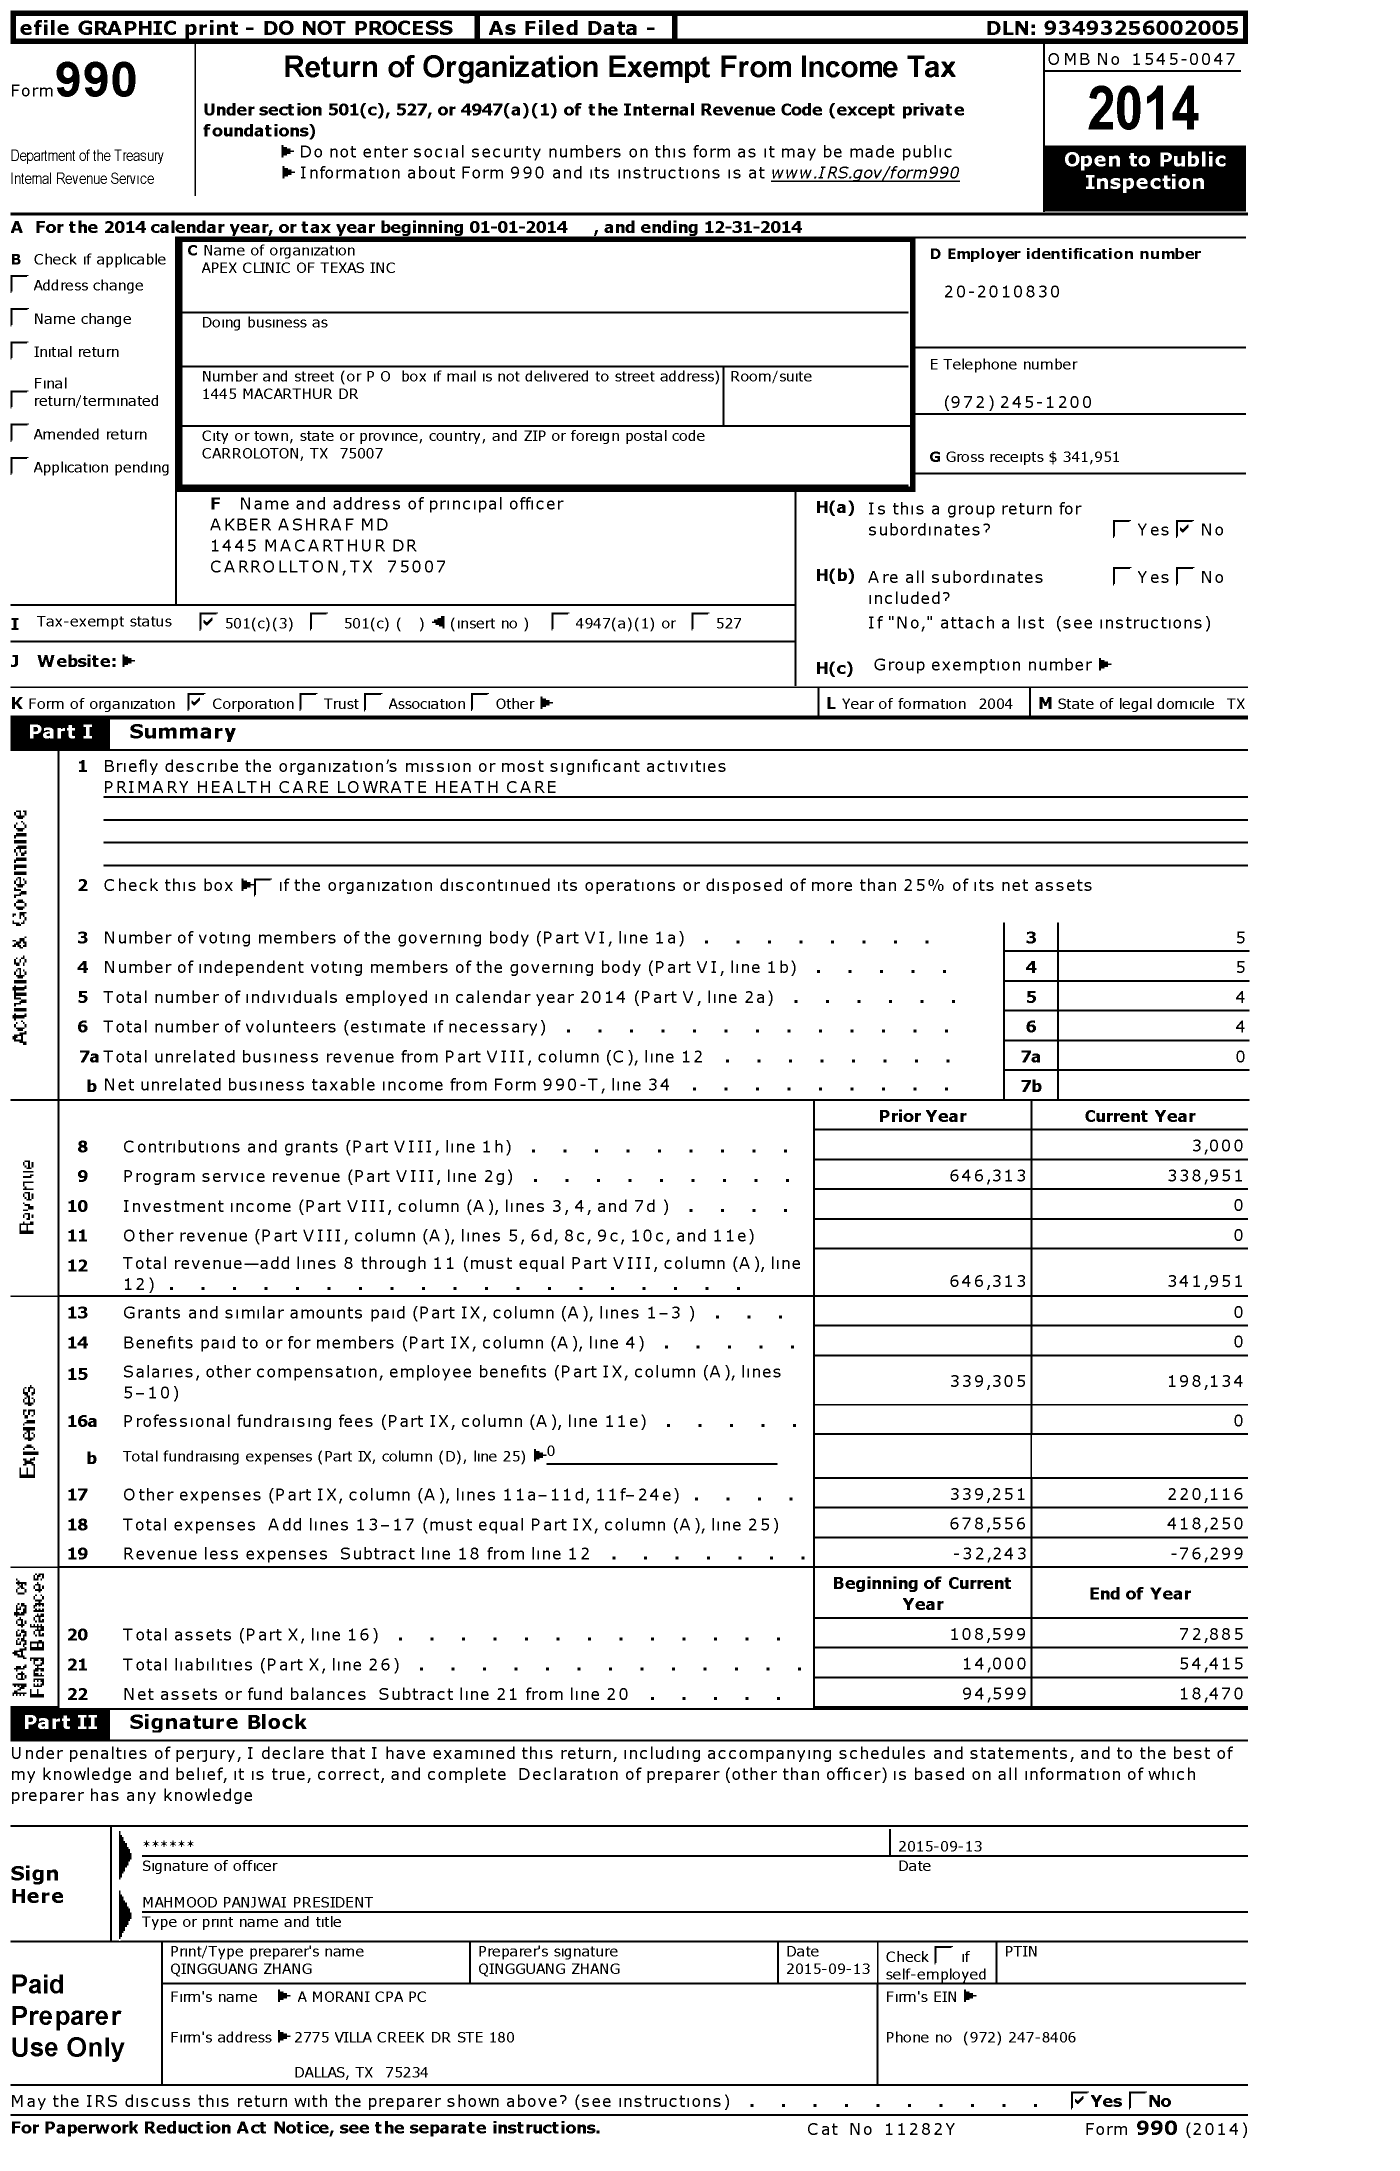 Image of first page of 2014 Form 990 for Apex Clinic of Texas